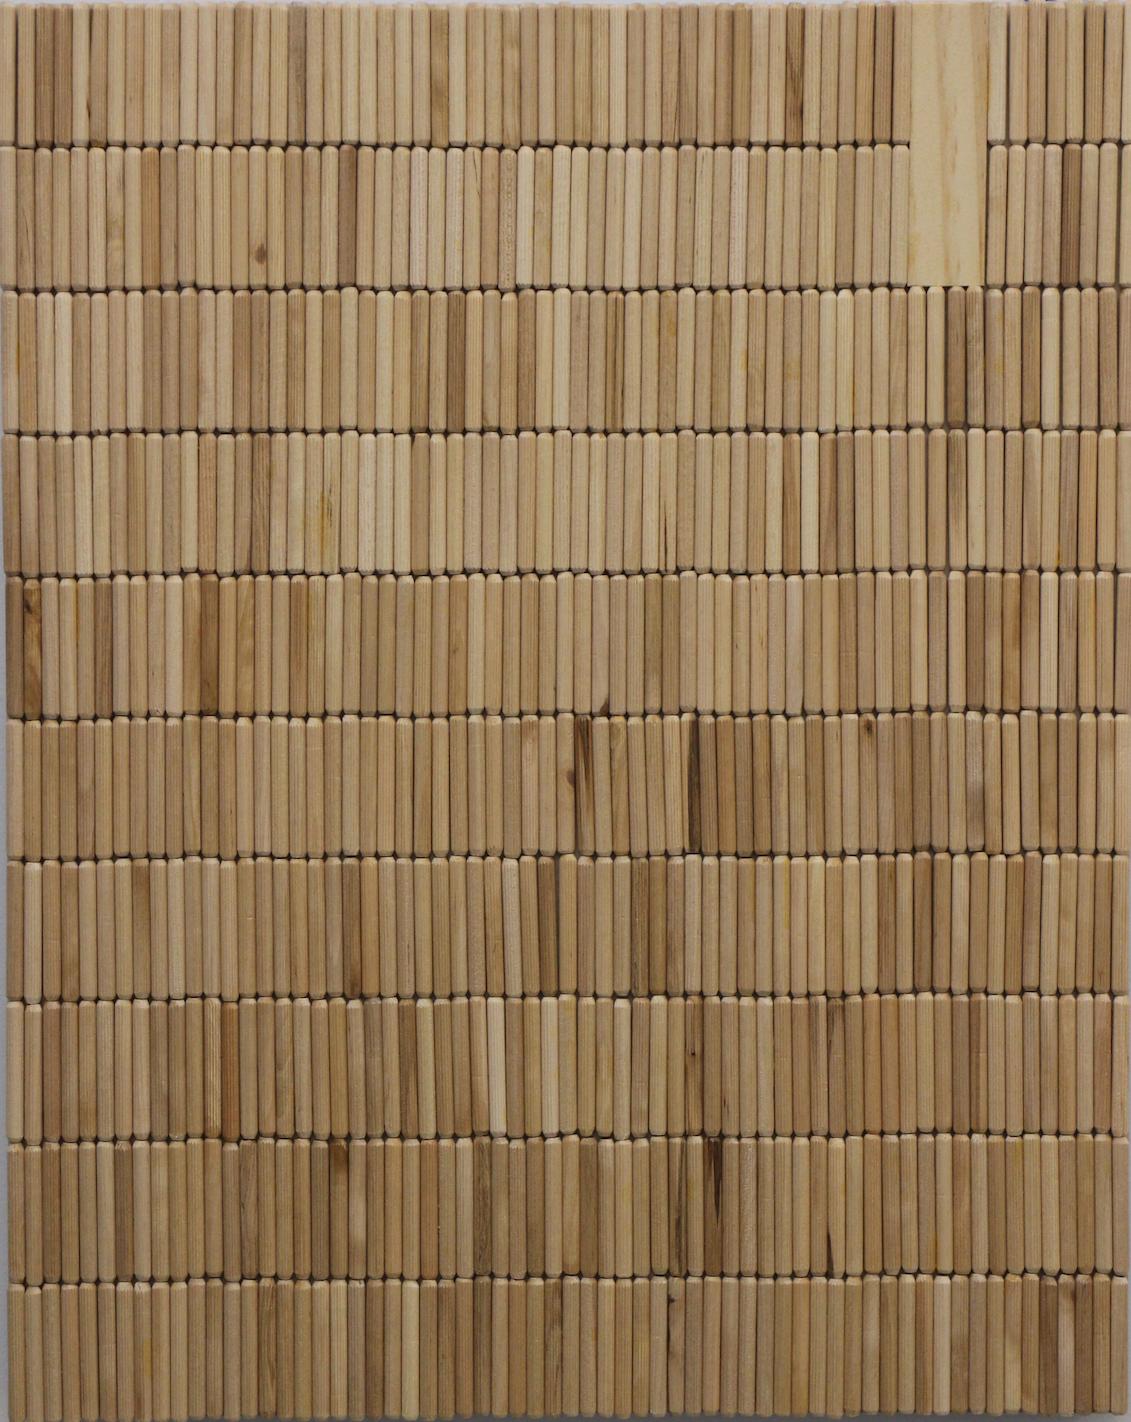 Natural Rod Painting, Wood on panel Painting